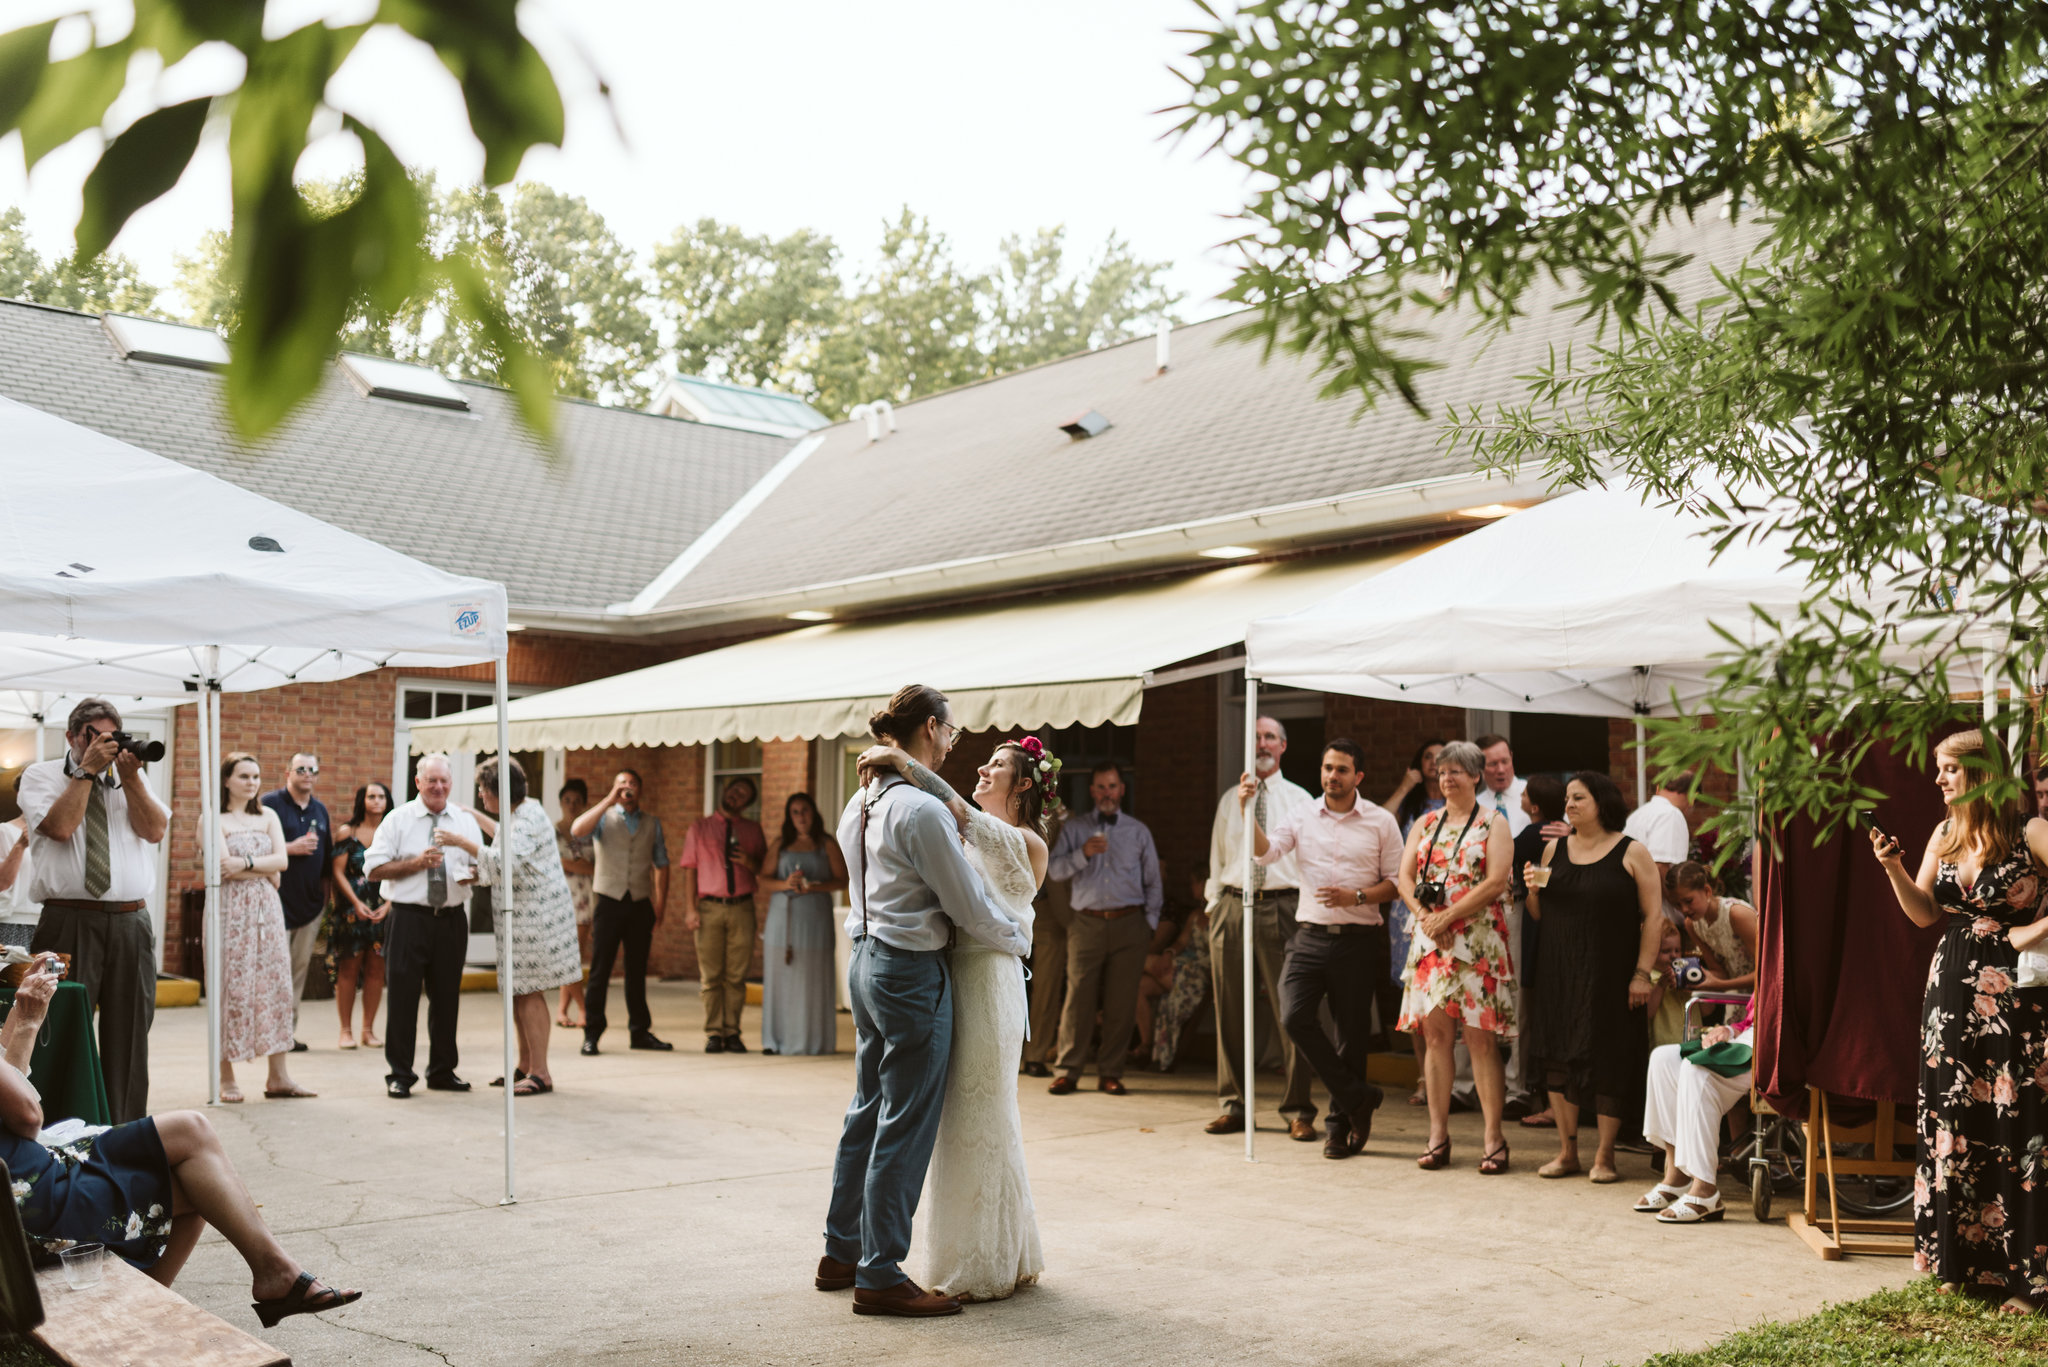  Annapolis, Quaker Wedding, Maryland Wedding Photographer, Intimate, Small Wedding, Vintage, DIY, Bride and Groom Have First Dance Outside, Guests Watch First Dance 